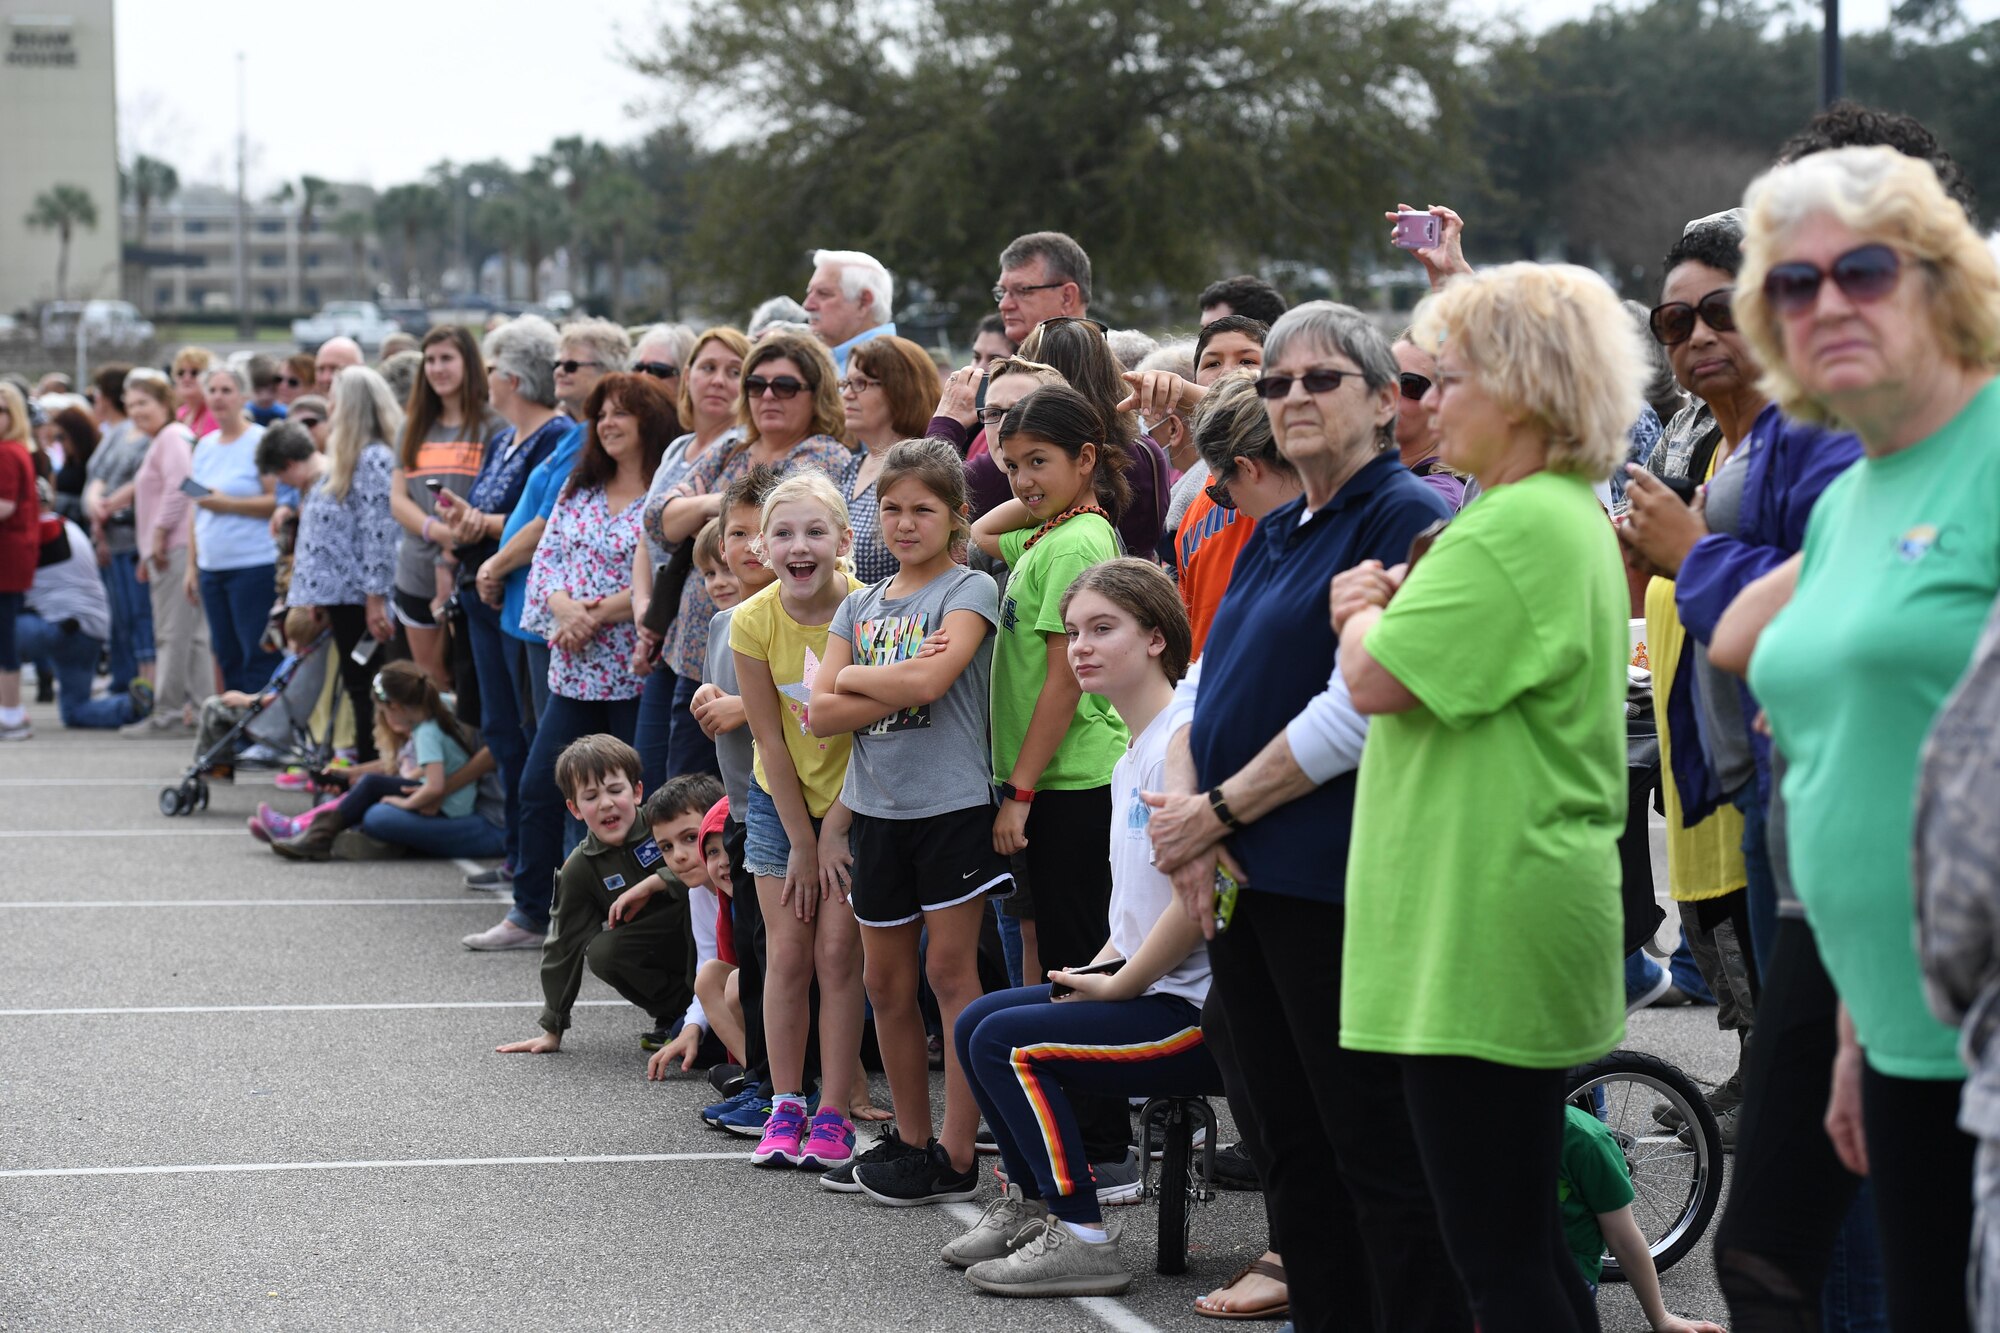 Keesler families line the base exchange parking lot to view the Budweiser Clydesdales as they make an appearance at Keesler Air Force Base, Mississippi, Feb. 7, 2019. They made their first appearance in 1933 and have been featured prominently in two presidential inaugurations. The Keesler Base Exchange hosted the event for Airmen and their families to enjoy. (U.S. Air Force photo by Kemberly Groue)